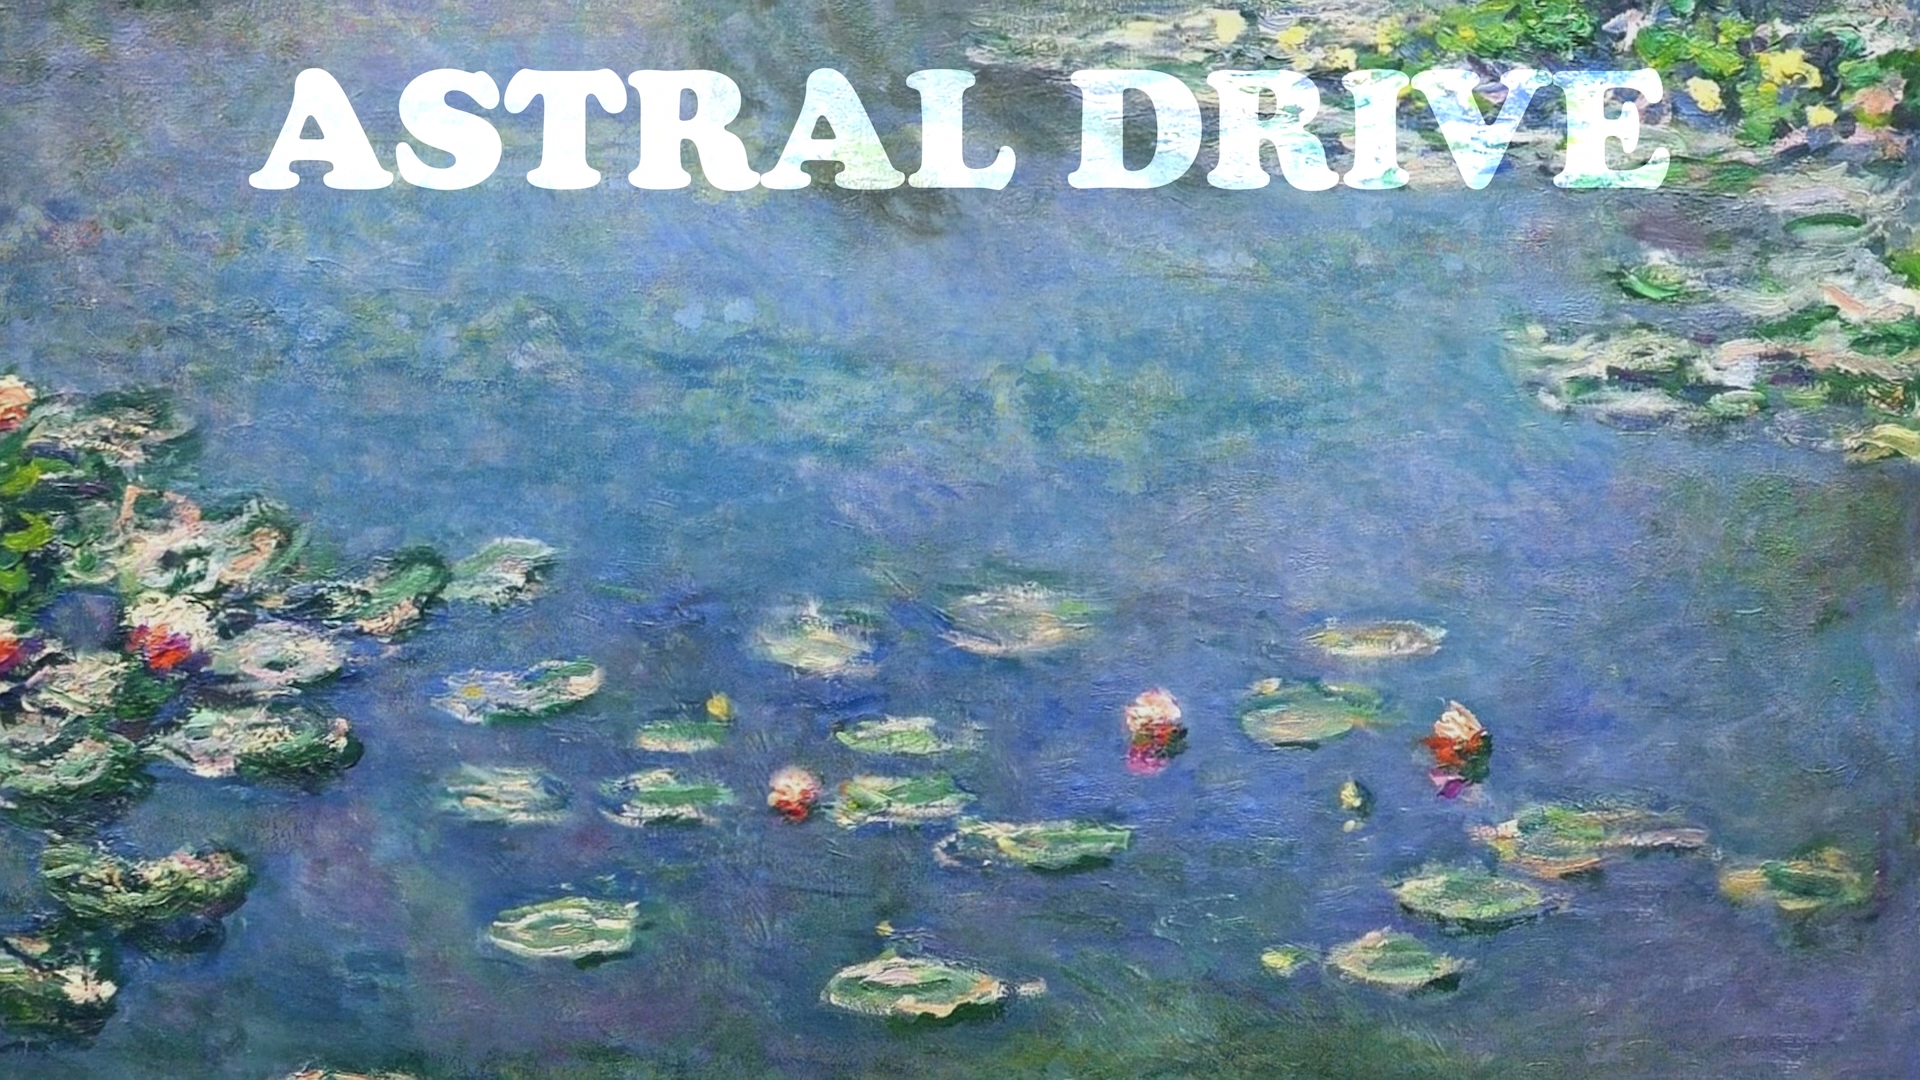 Astral Drive - Water Lilies Video